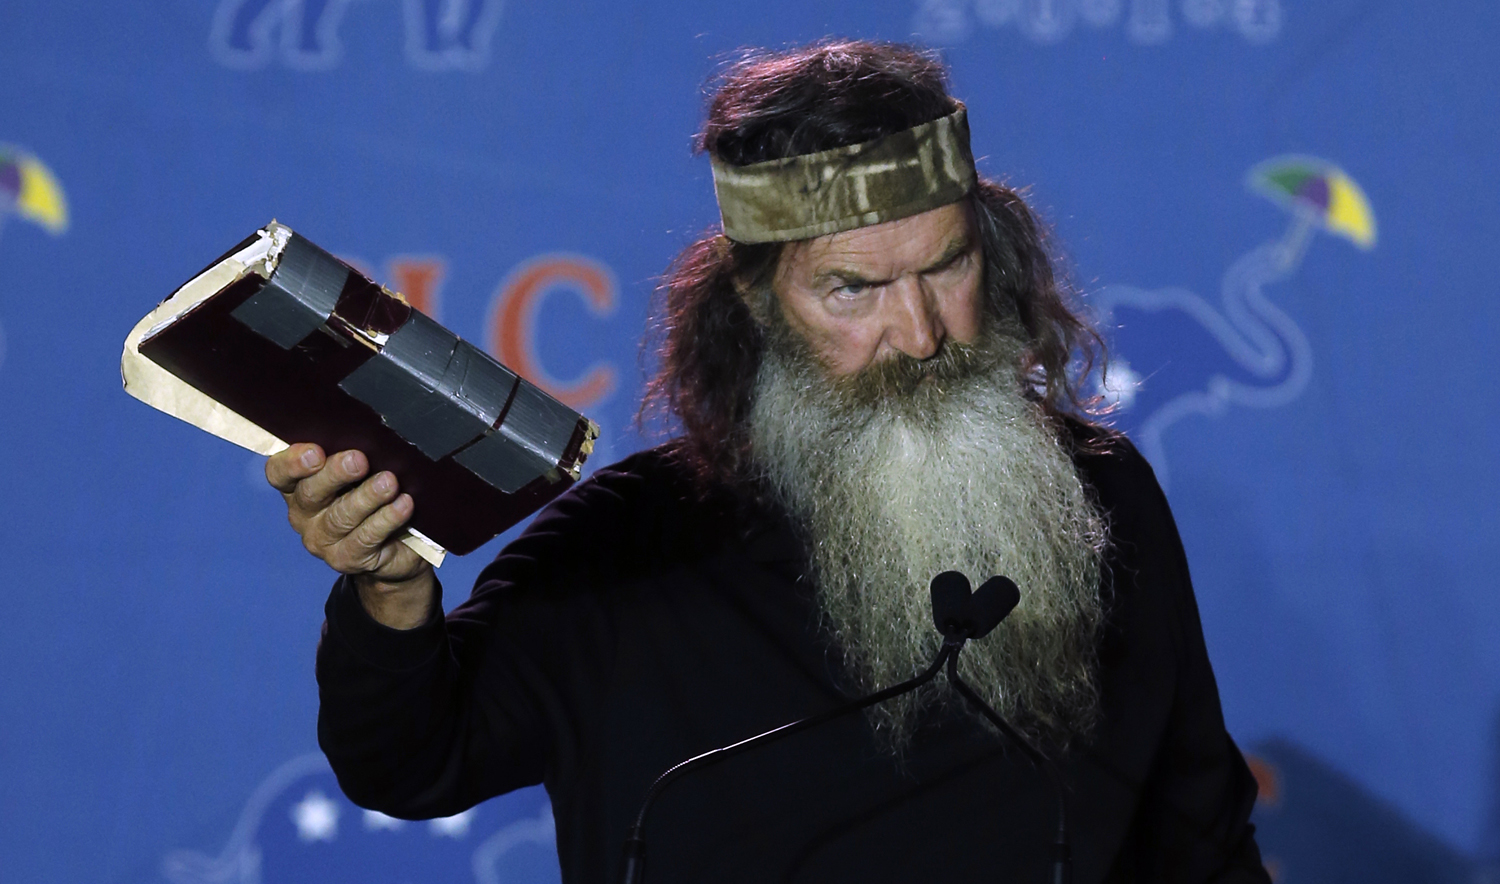 Phil Robertson addresses the Republican Leadership Conference in New Orleans, La. on Thursday, May 29, 2014. (Bill Haber — AP)